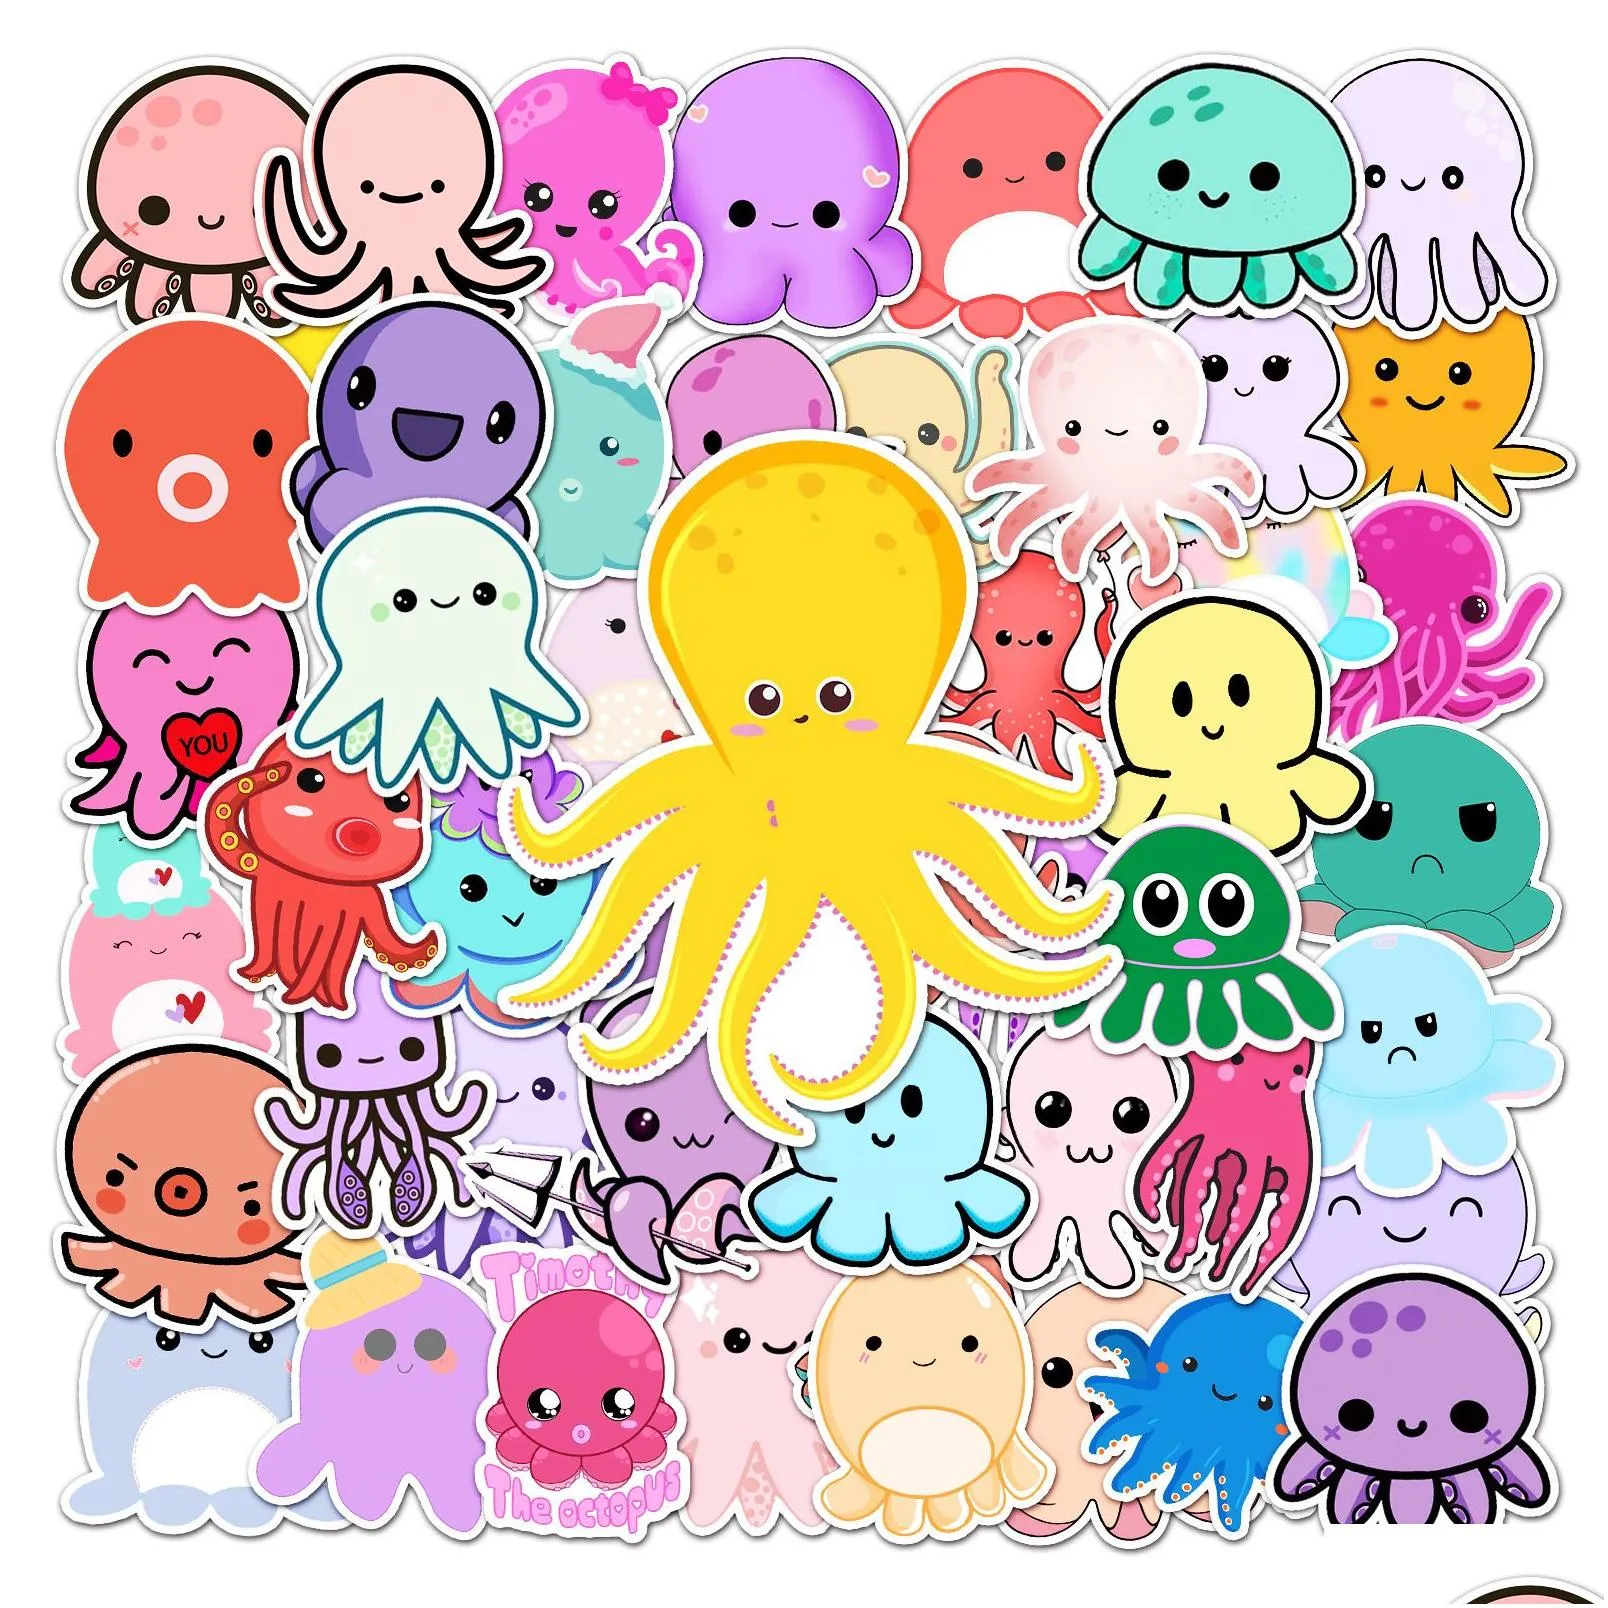 50pcs octopus stickers skate accessories waterproof vinyl sticker for skateboard laptop luggage bicycle motorcycle phone car decals